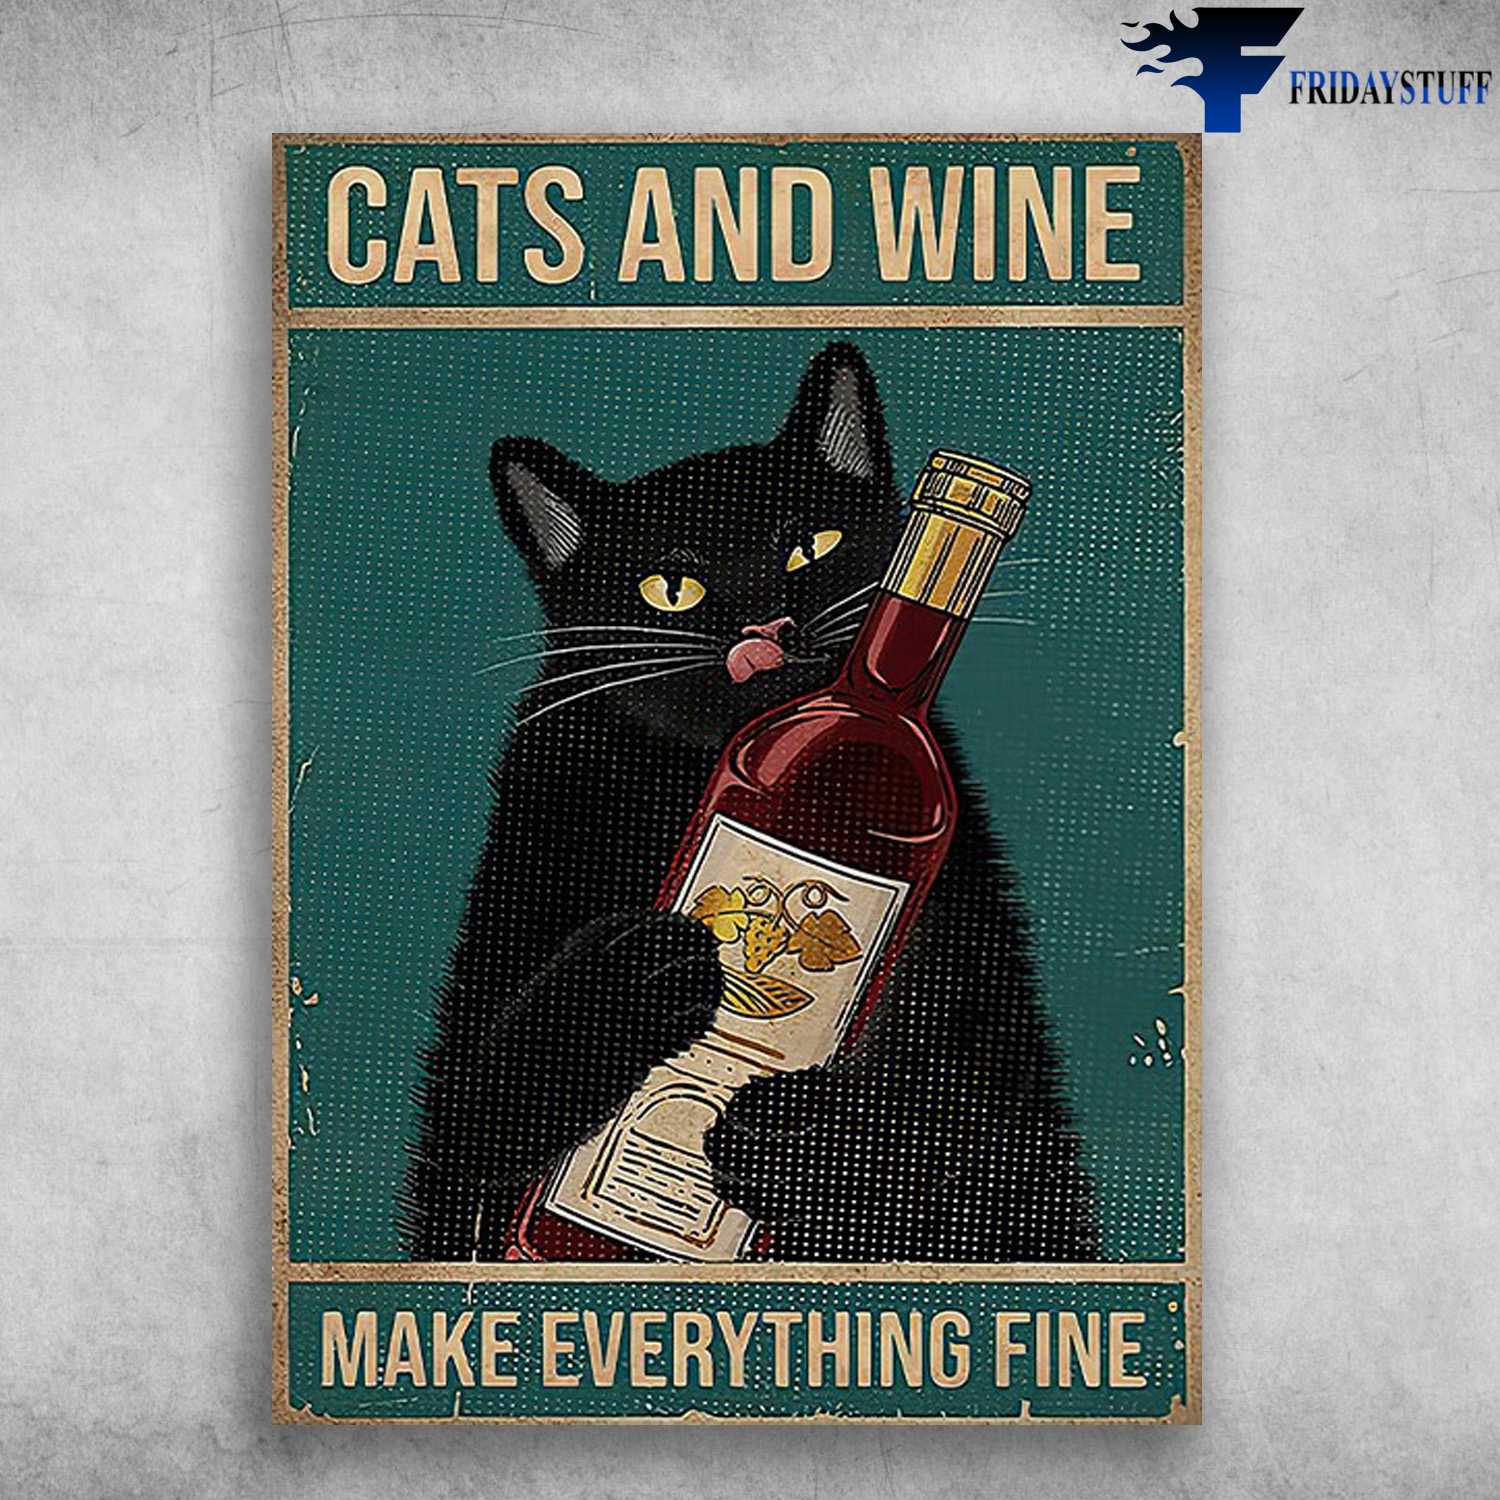 Black Cat Drinking - Cats And Wine, Make Everything Fine